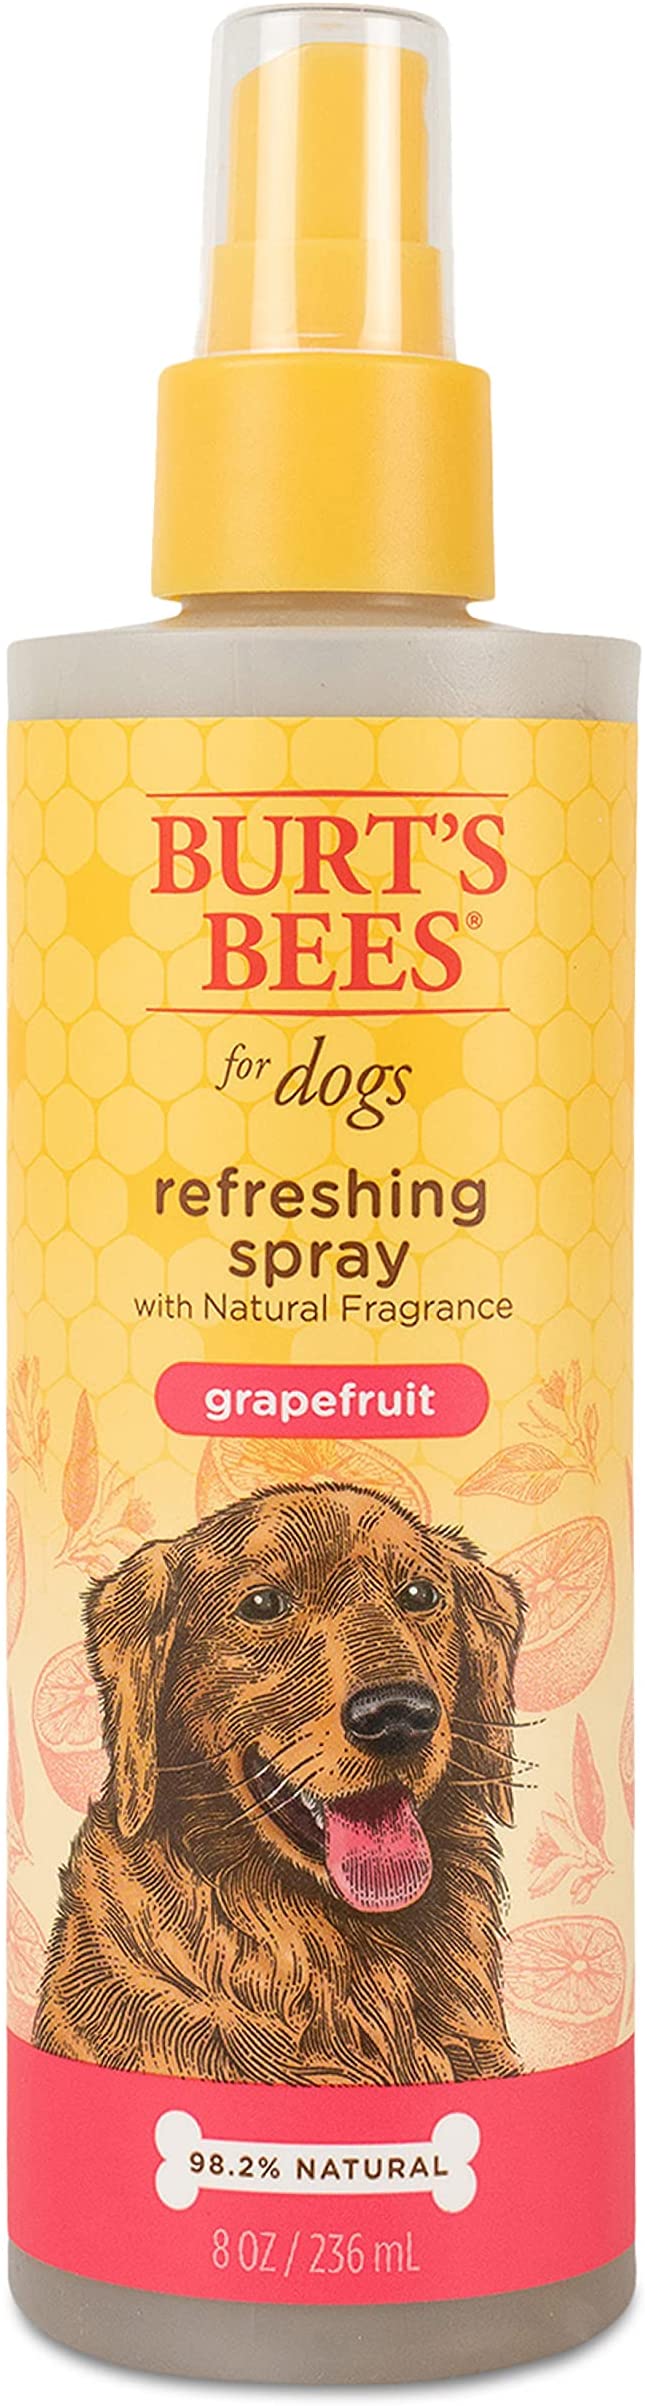 Burt's Bees for Dogs Dog Grooming Supplies, Grapefruit Fragrance - 2 in 1 Dog Shampoo & Conditioner, Dog Conditioner, Dog Deodorizing Spray, Dog Spray, Dog Bath Supplies, Pet Shampoo, Puppy Shampoo